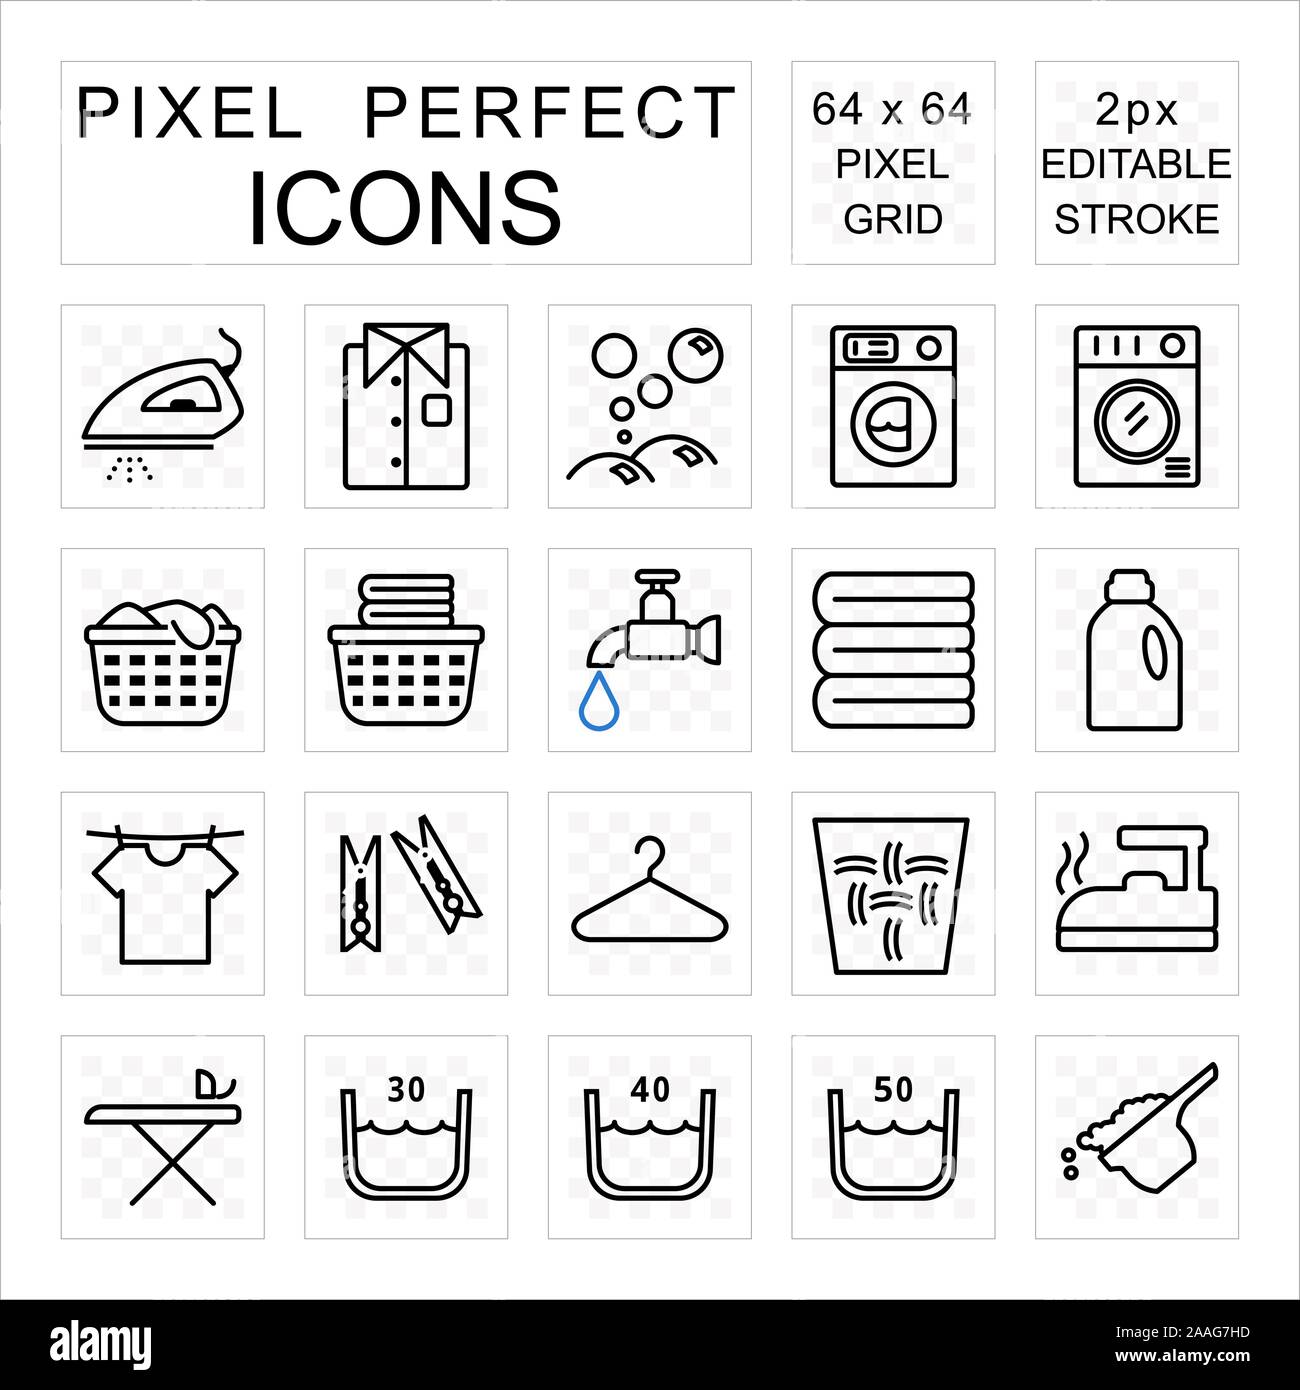 Laundry pixel perfect icon set with washing and housework concept editable 2 pixel stroke Stock Vector